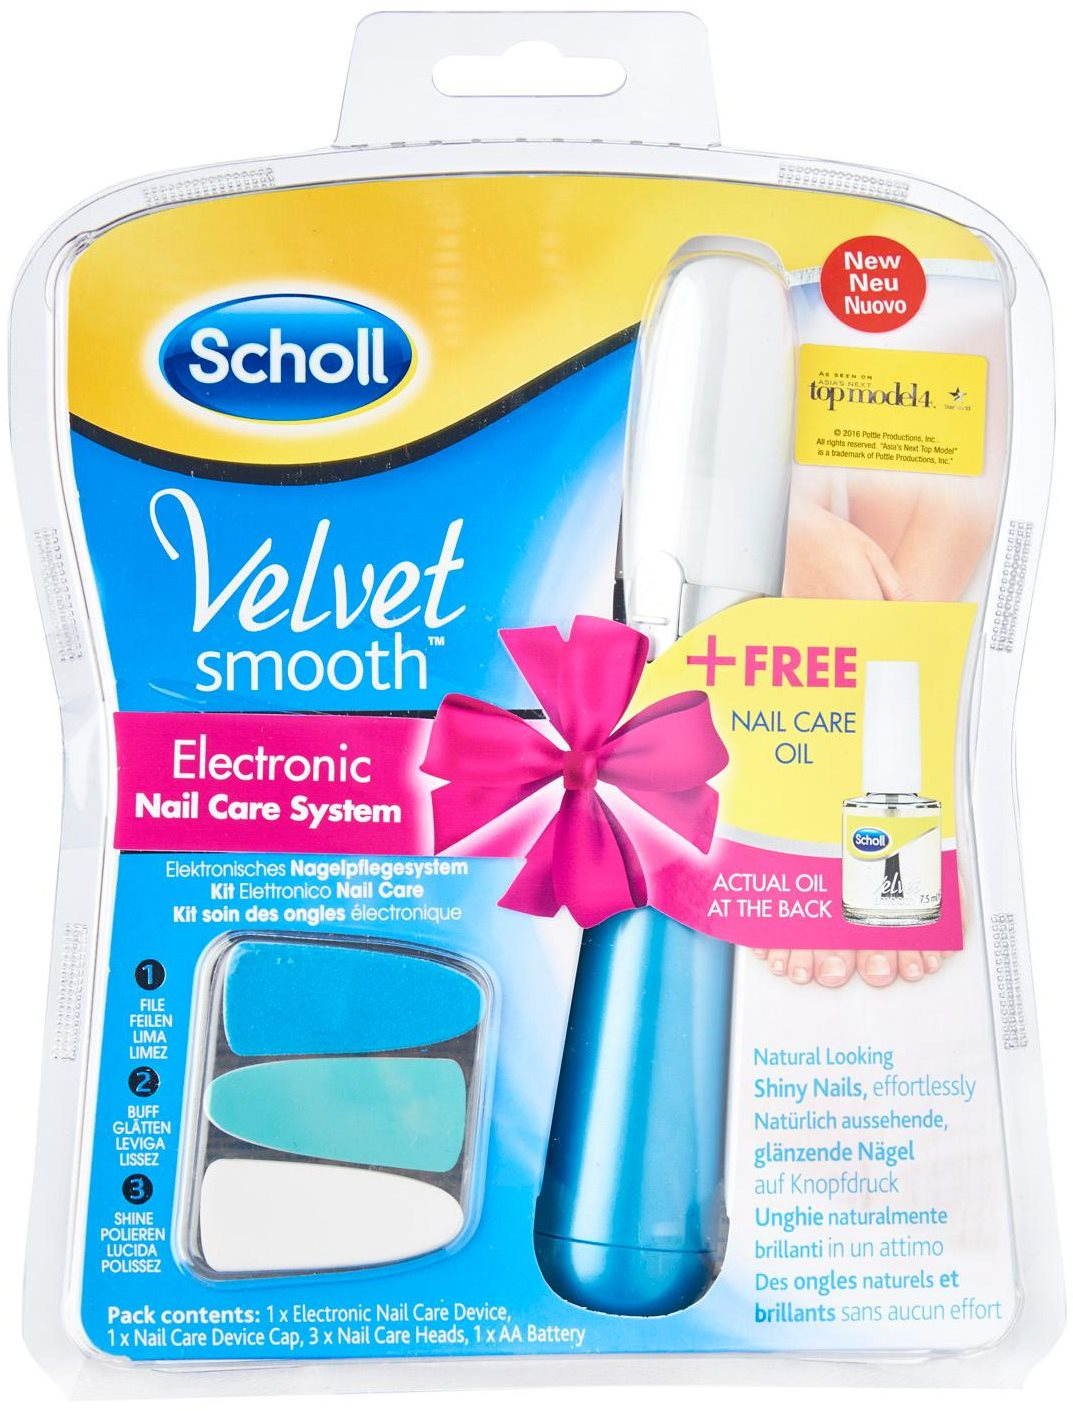 Scholl Velvet Smooth Electronic Nail Care System Brand New | eBay